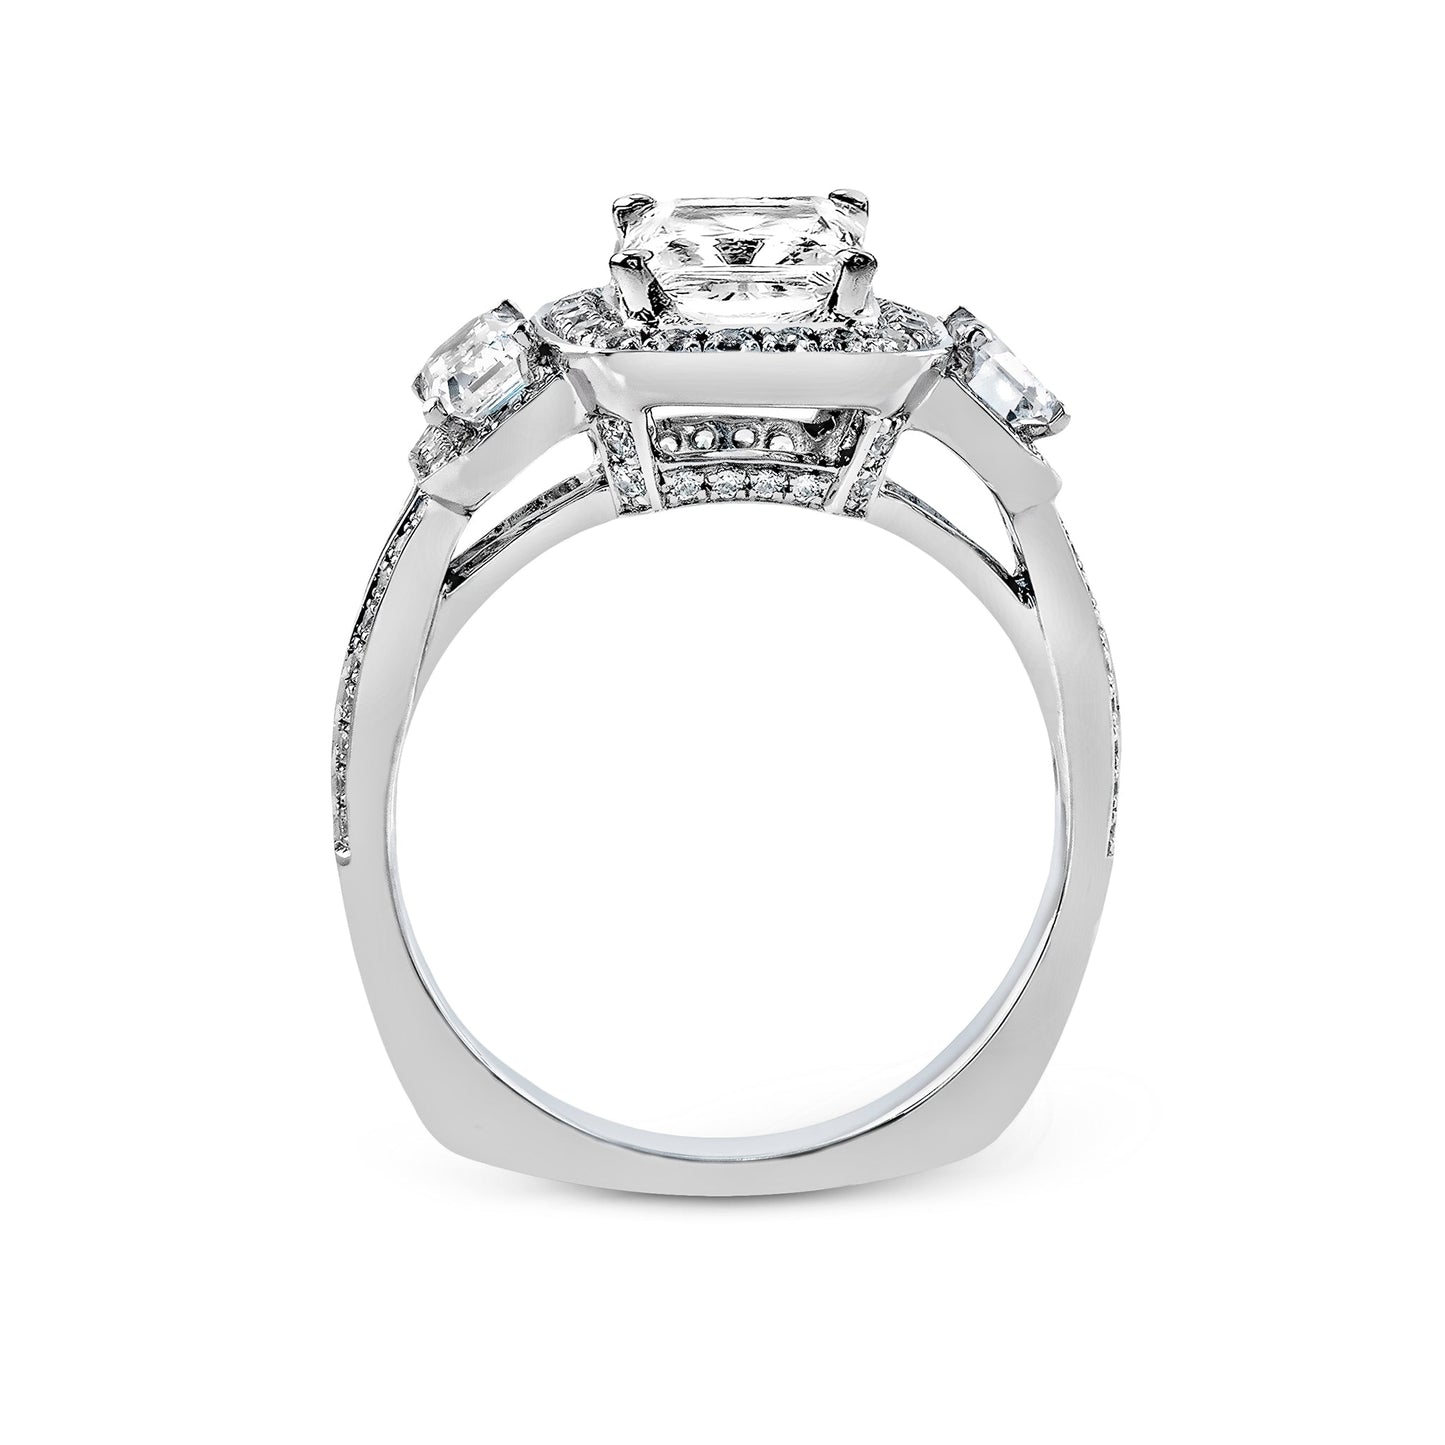 Princess-Cut Three-Stone Halo Engagement Ring In 18k Gold With Diamonds